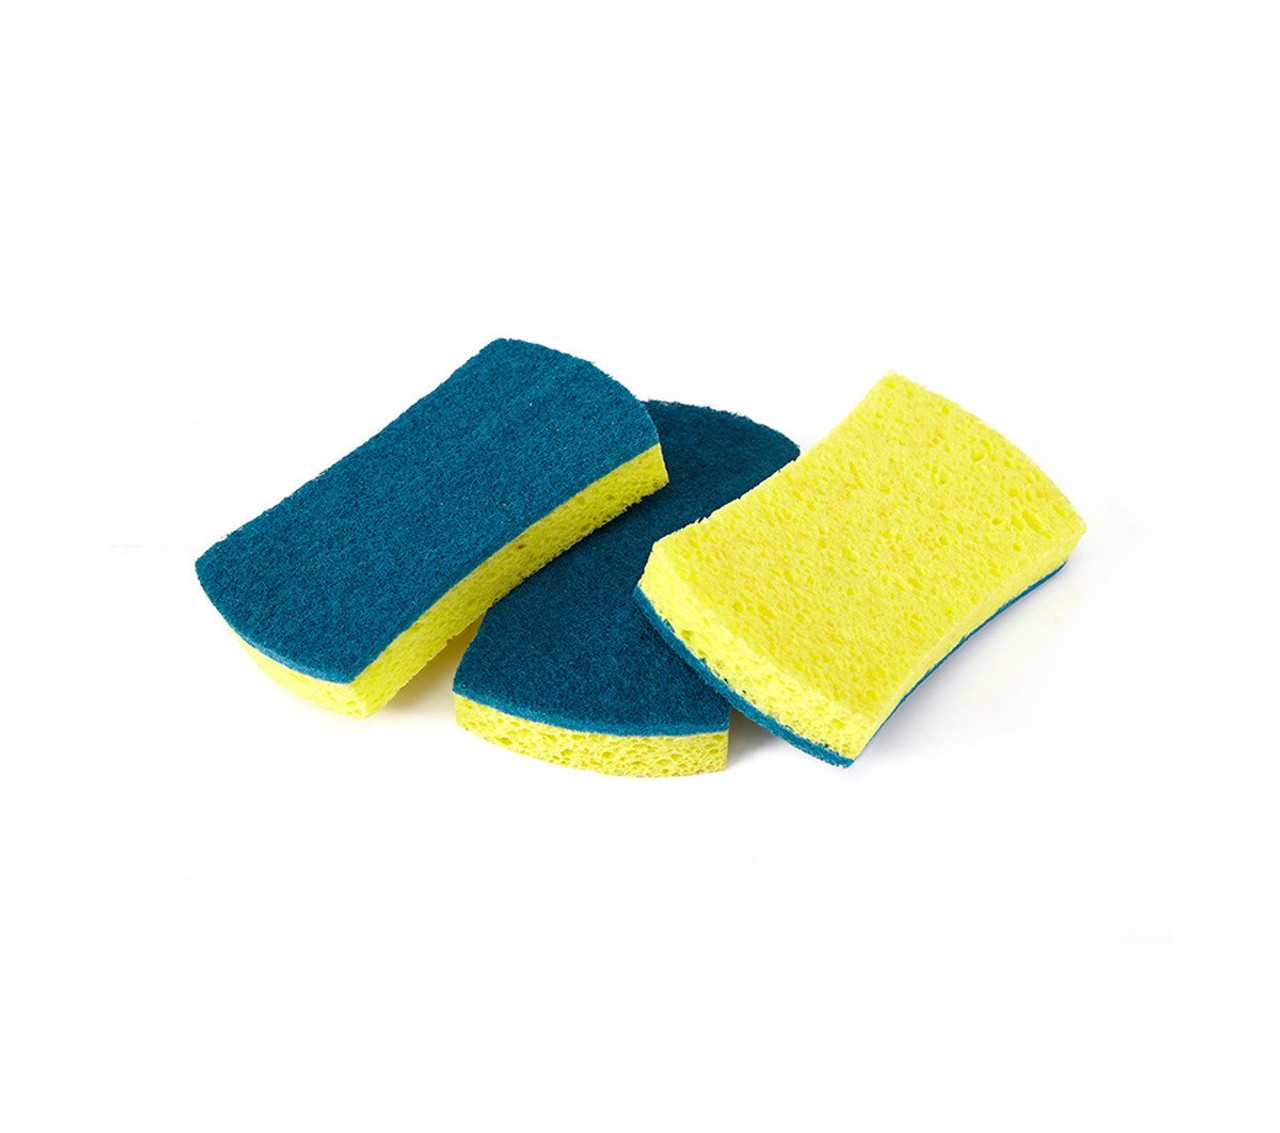 Full Circle Laid Back 2.0 Dish Sponge Replacement Head 2-Pack